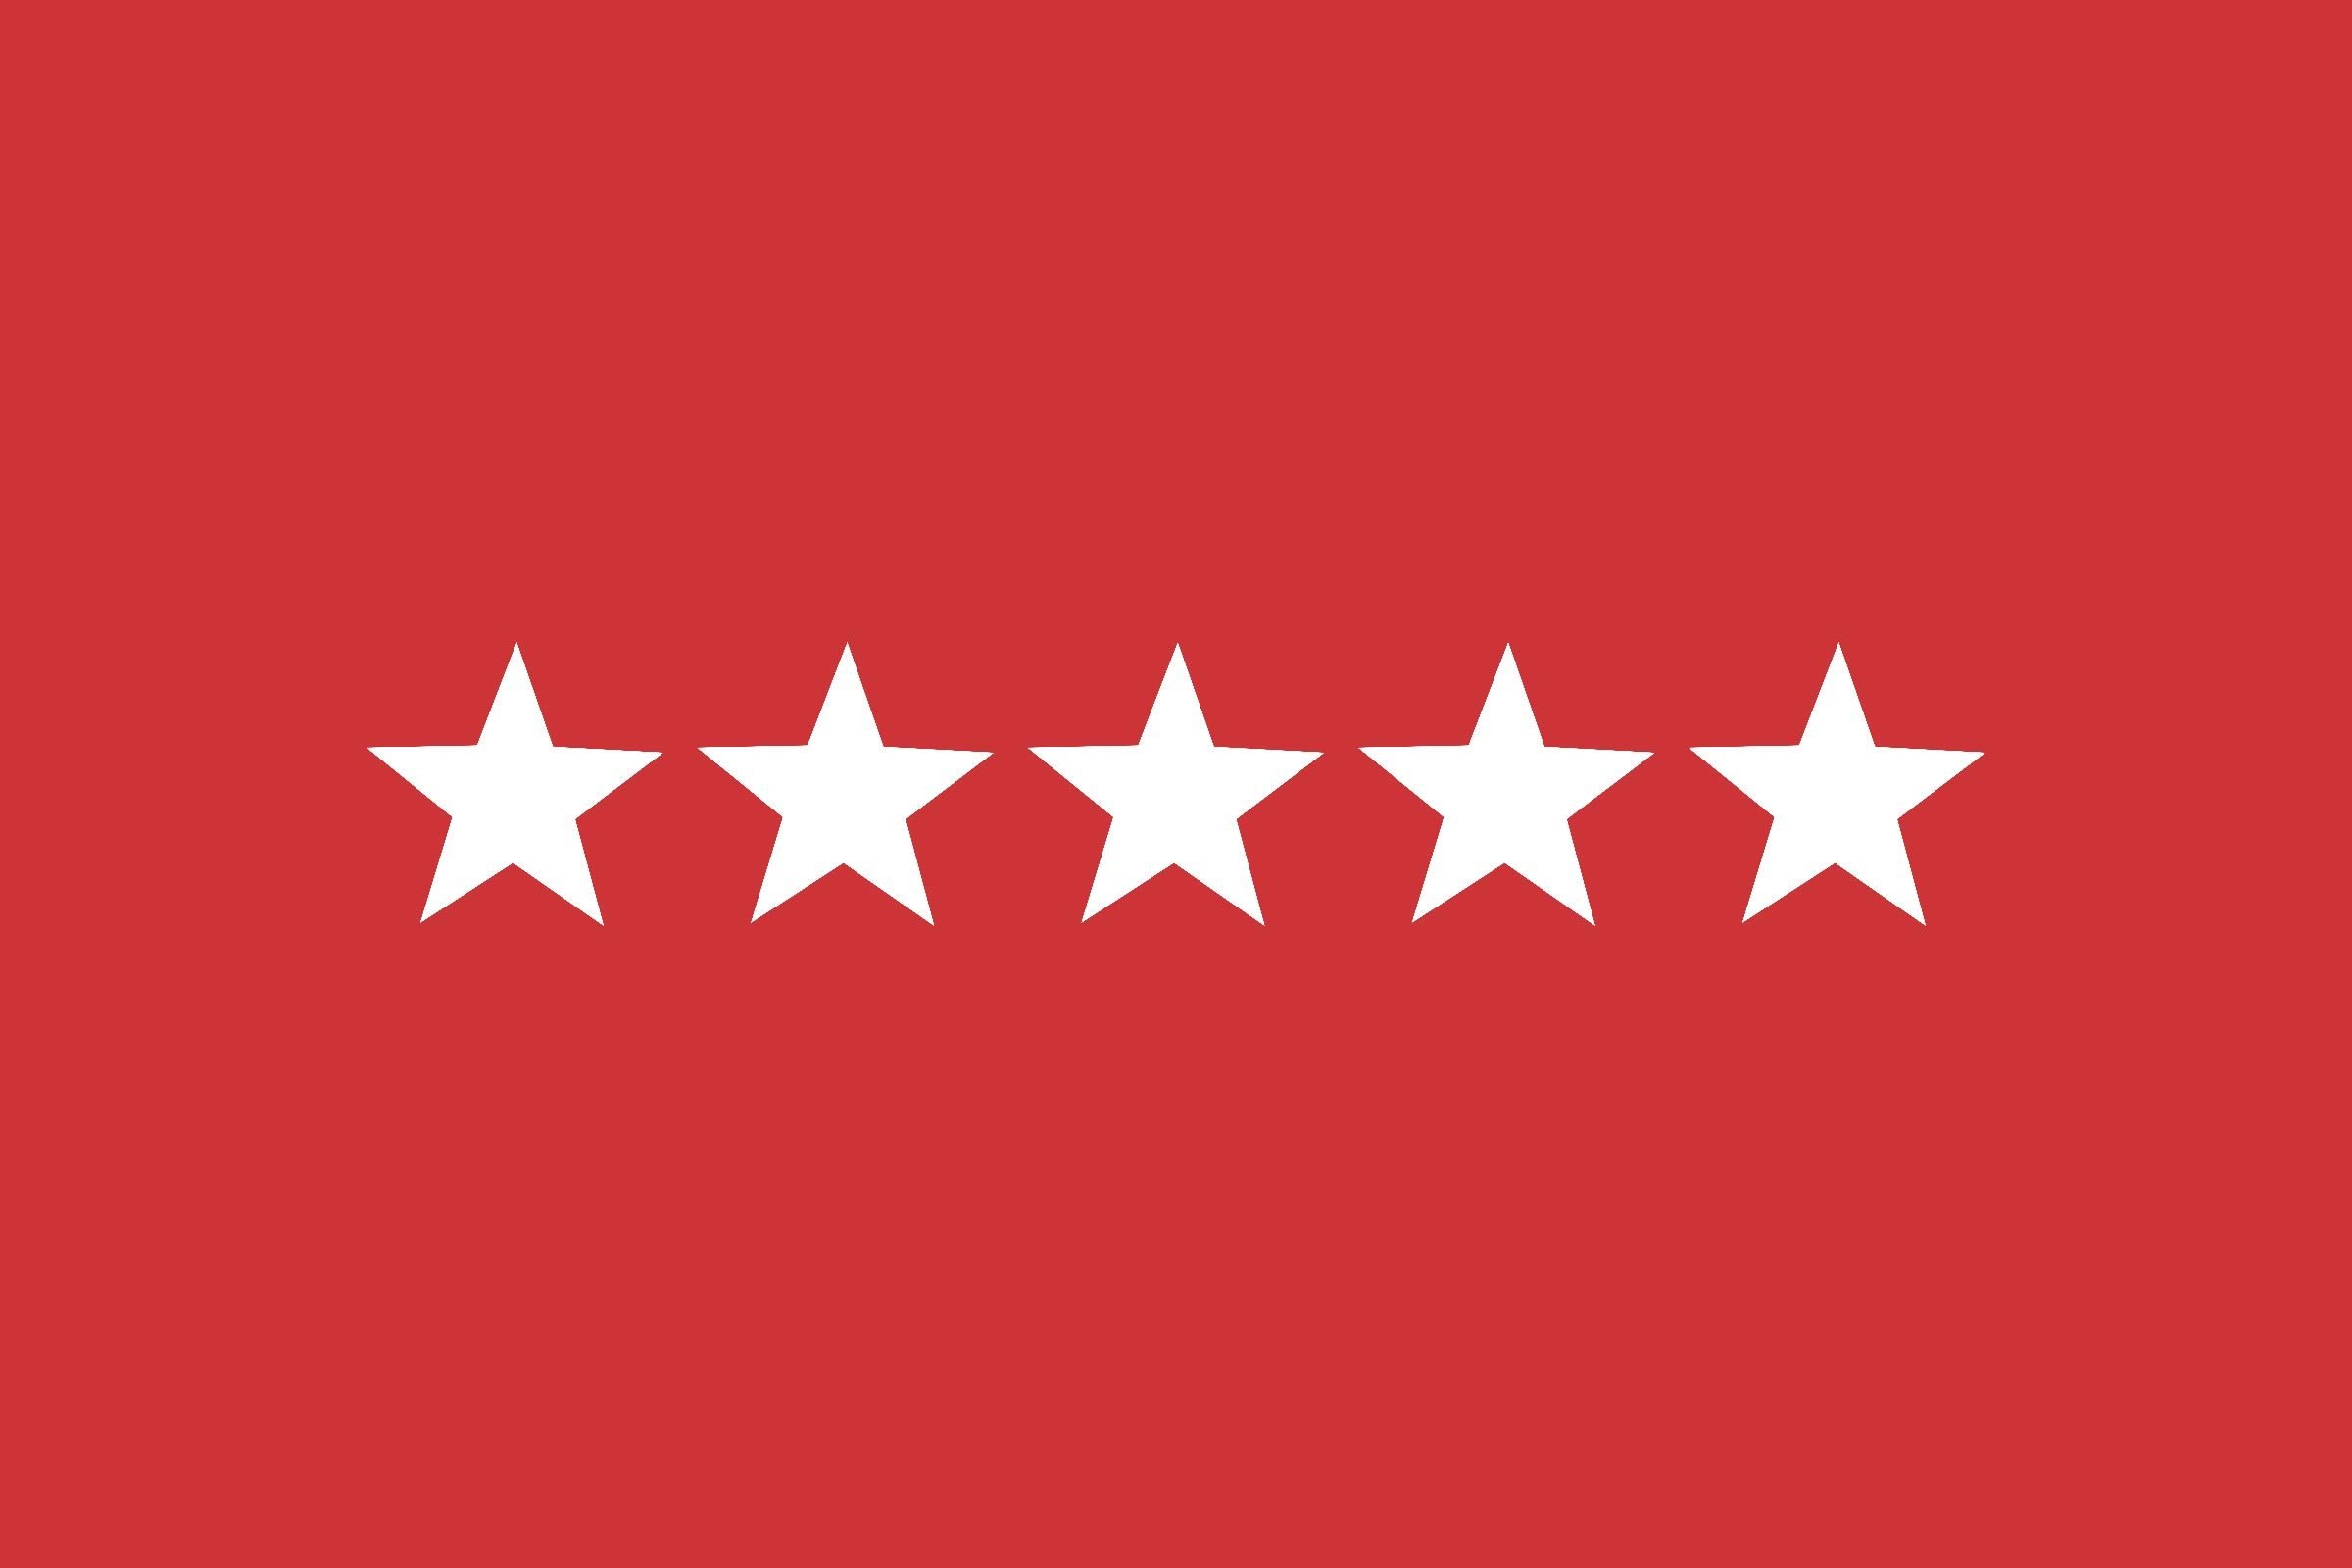 five white stars on a red background